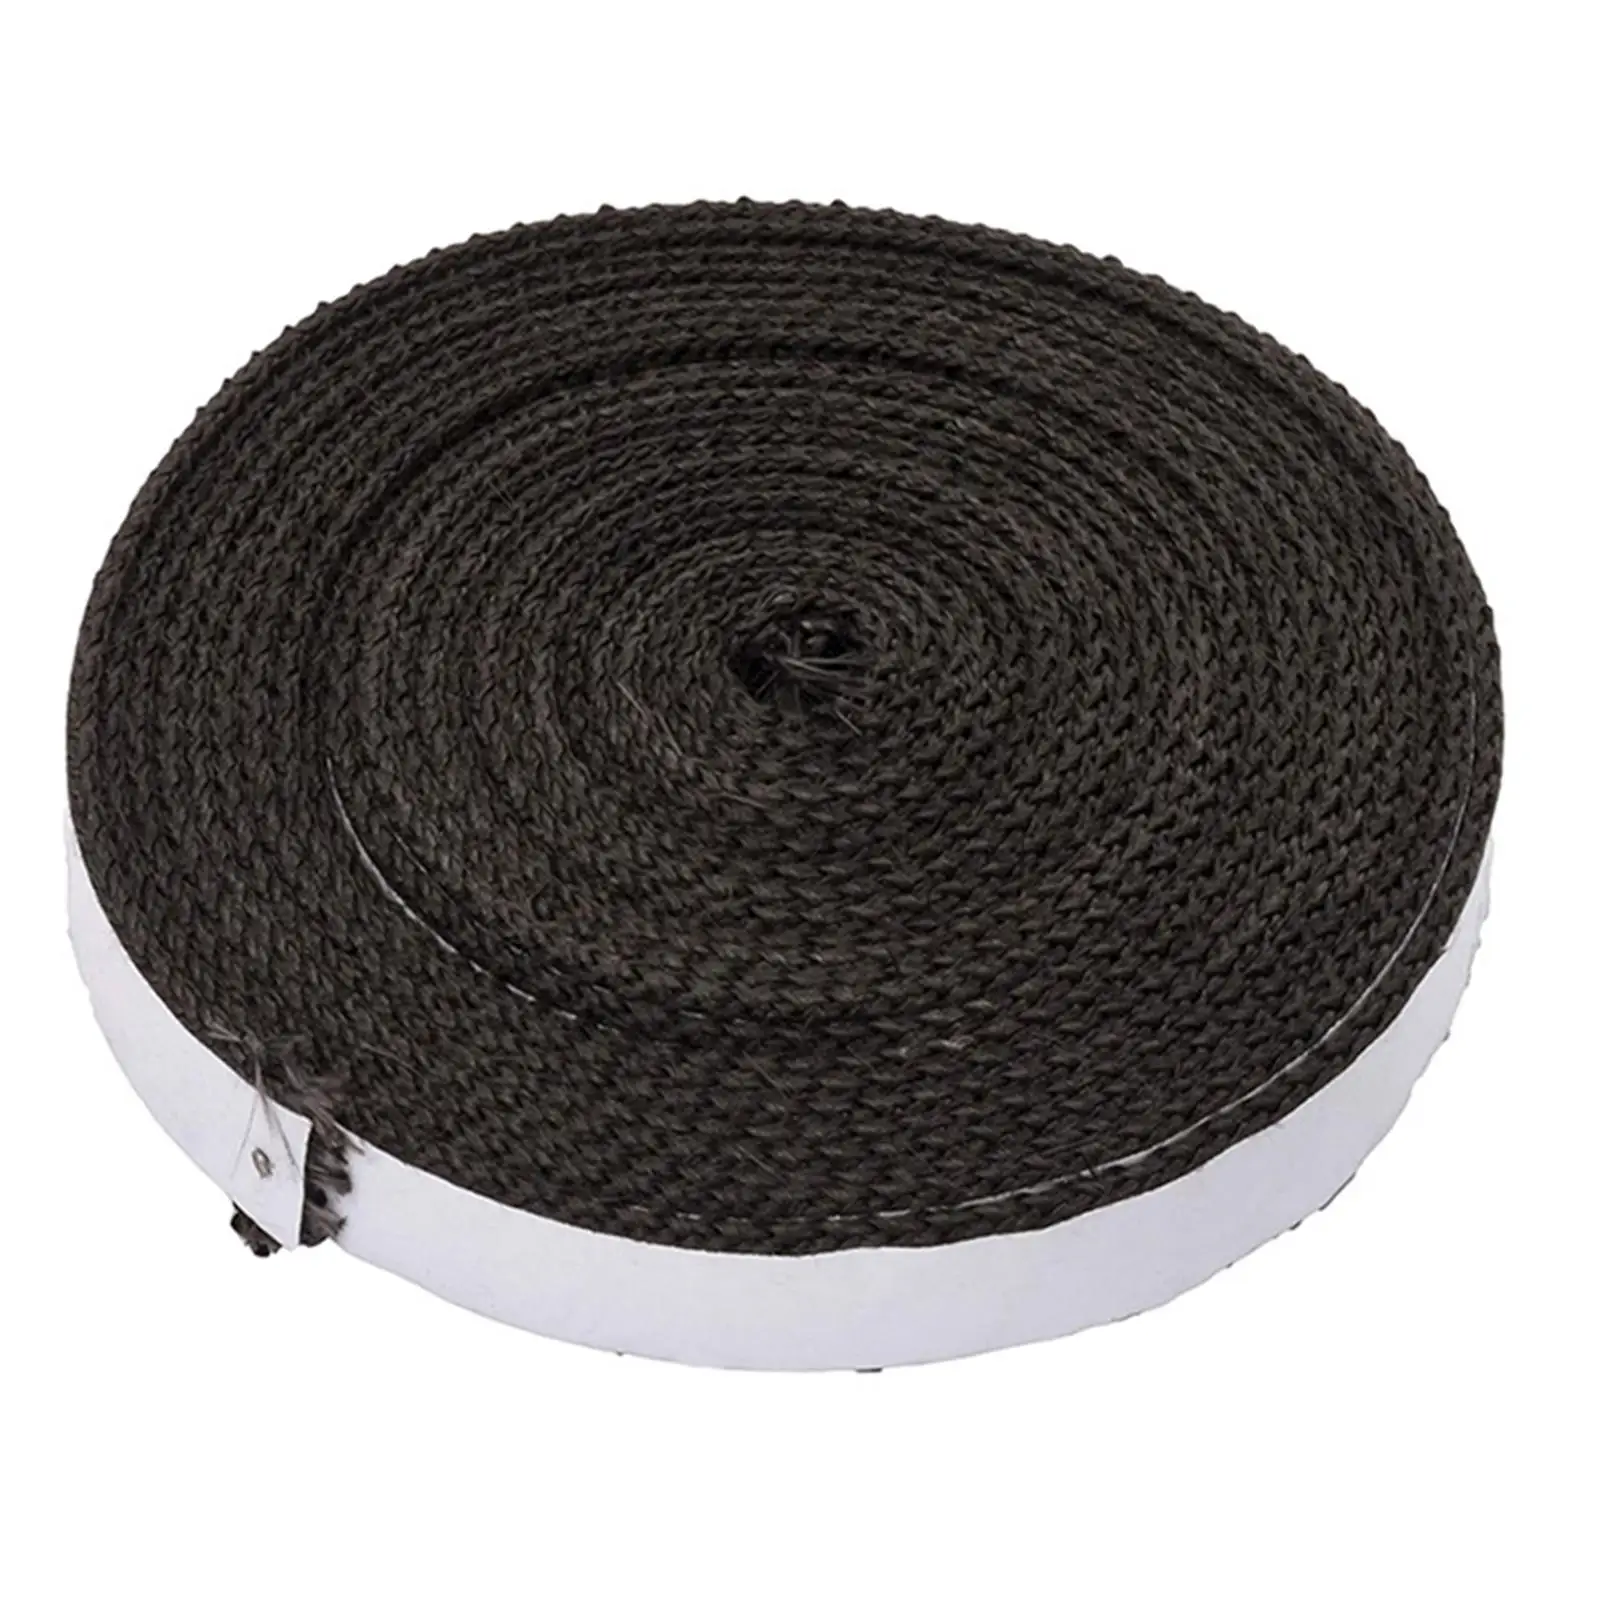 BBQ Gasket Seal Strip Fireproof Barbecue Tape Smoke Keeping Strip Heat Resistant Grill Gasket Accessories Replacement